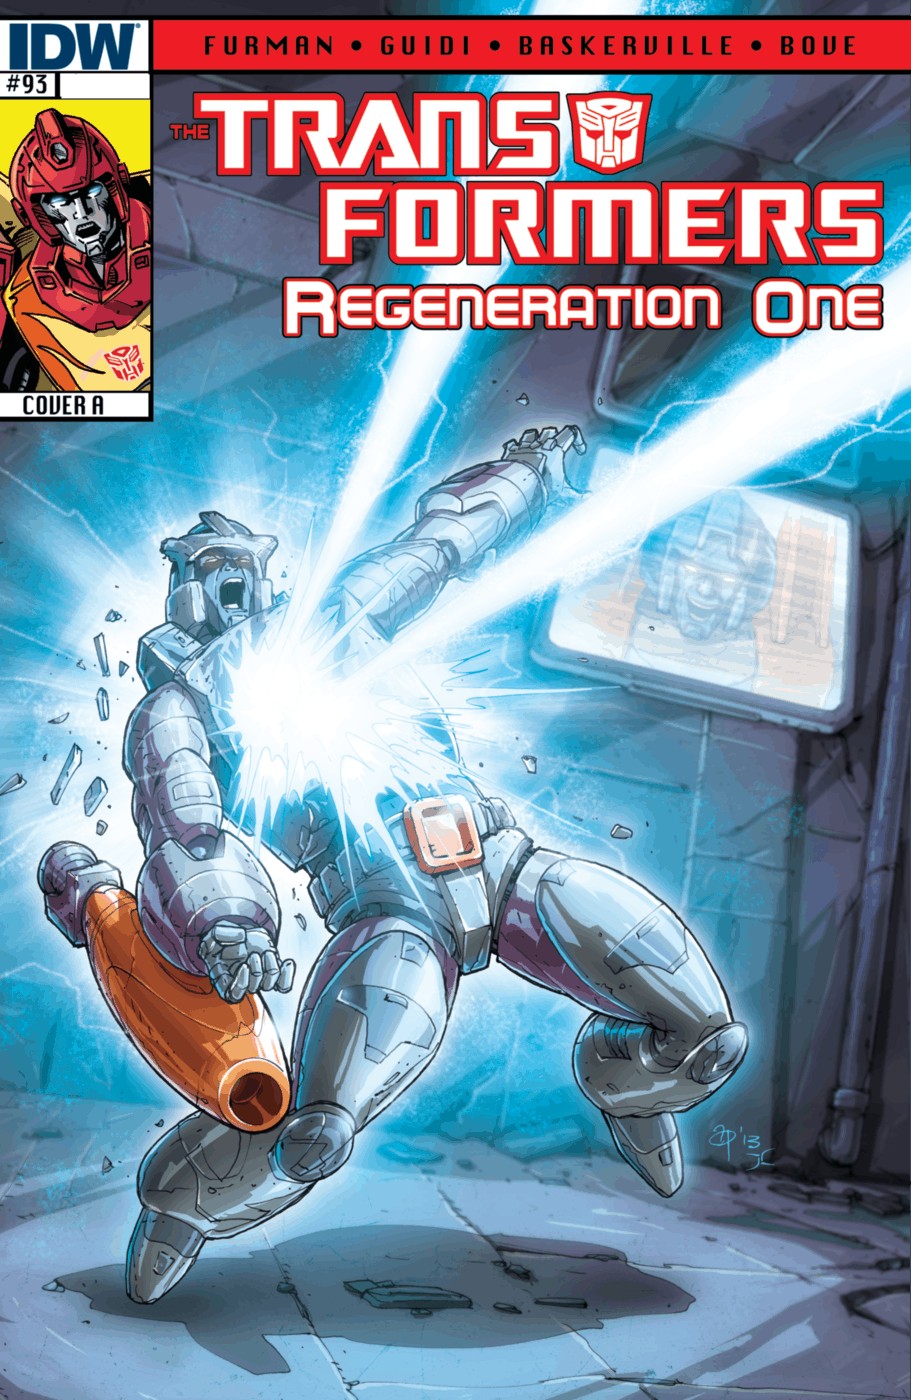 Read online The Transformers: Regeneration One comic -  Issue #93 - 1